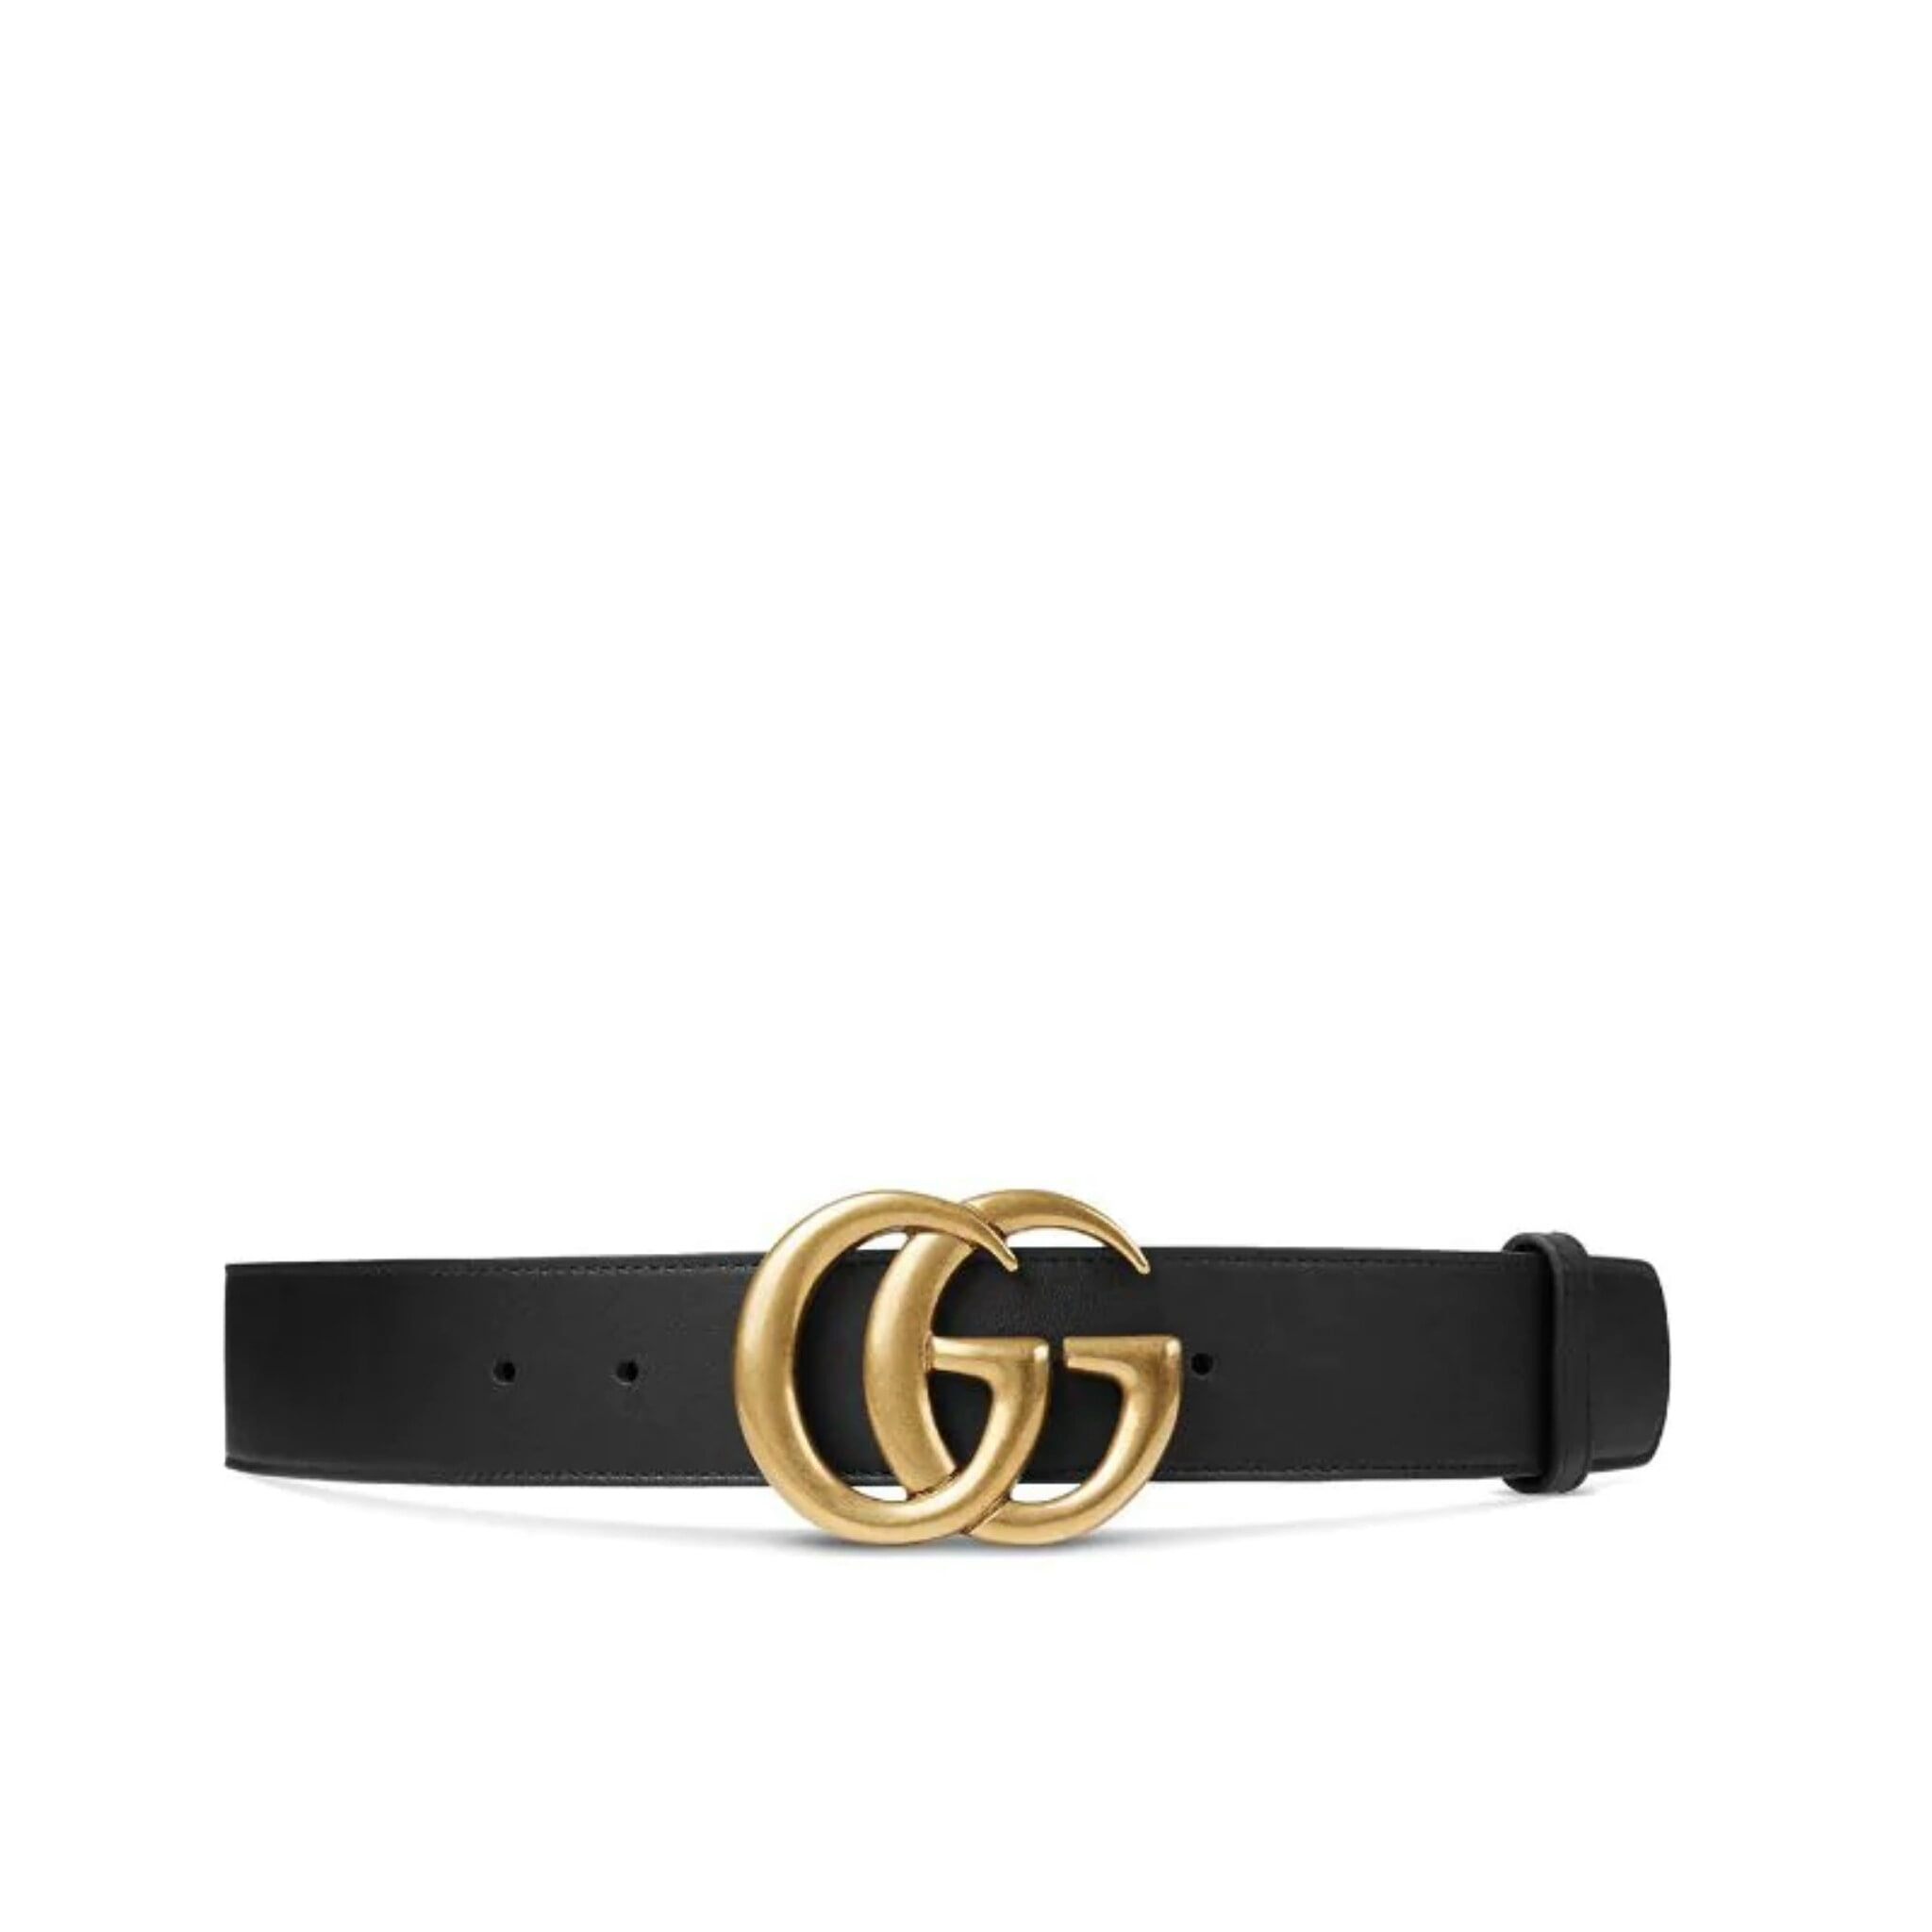 gucci belts for women price